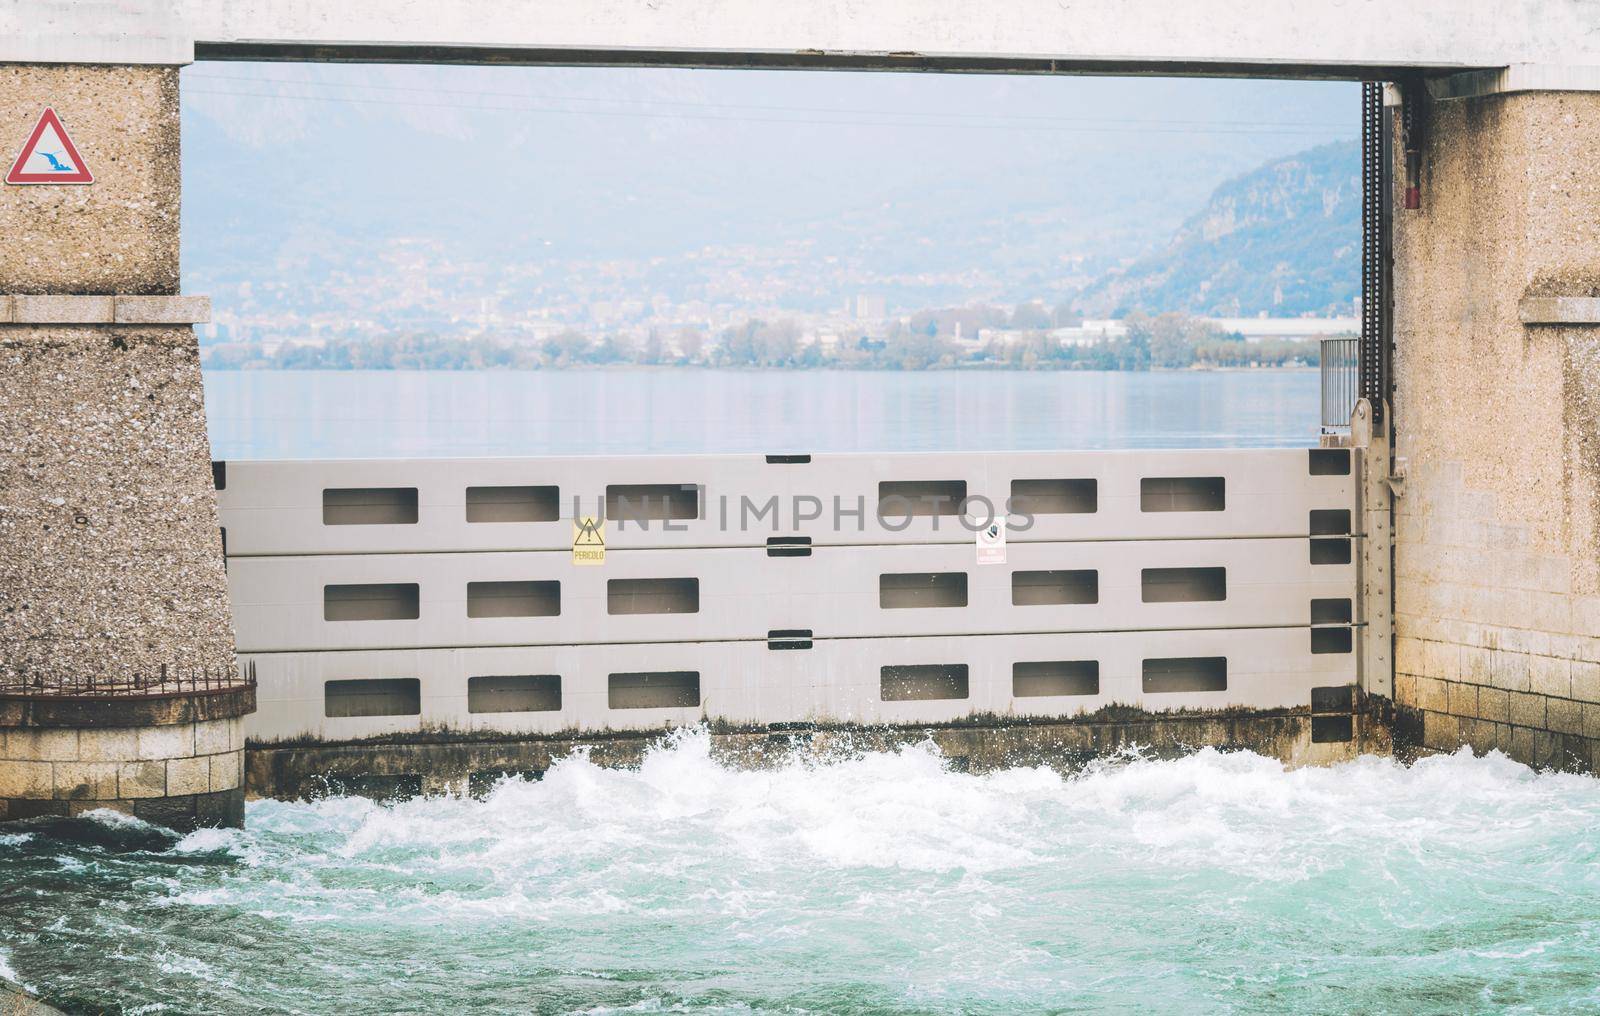 Italian dam - Diga di Olginate - divides the lakes Garlate and Olginate, regulates the Lake Como level and distribute outflows between the irrigation and hydroelectric utilities by photolime